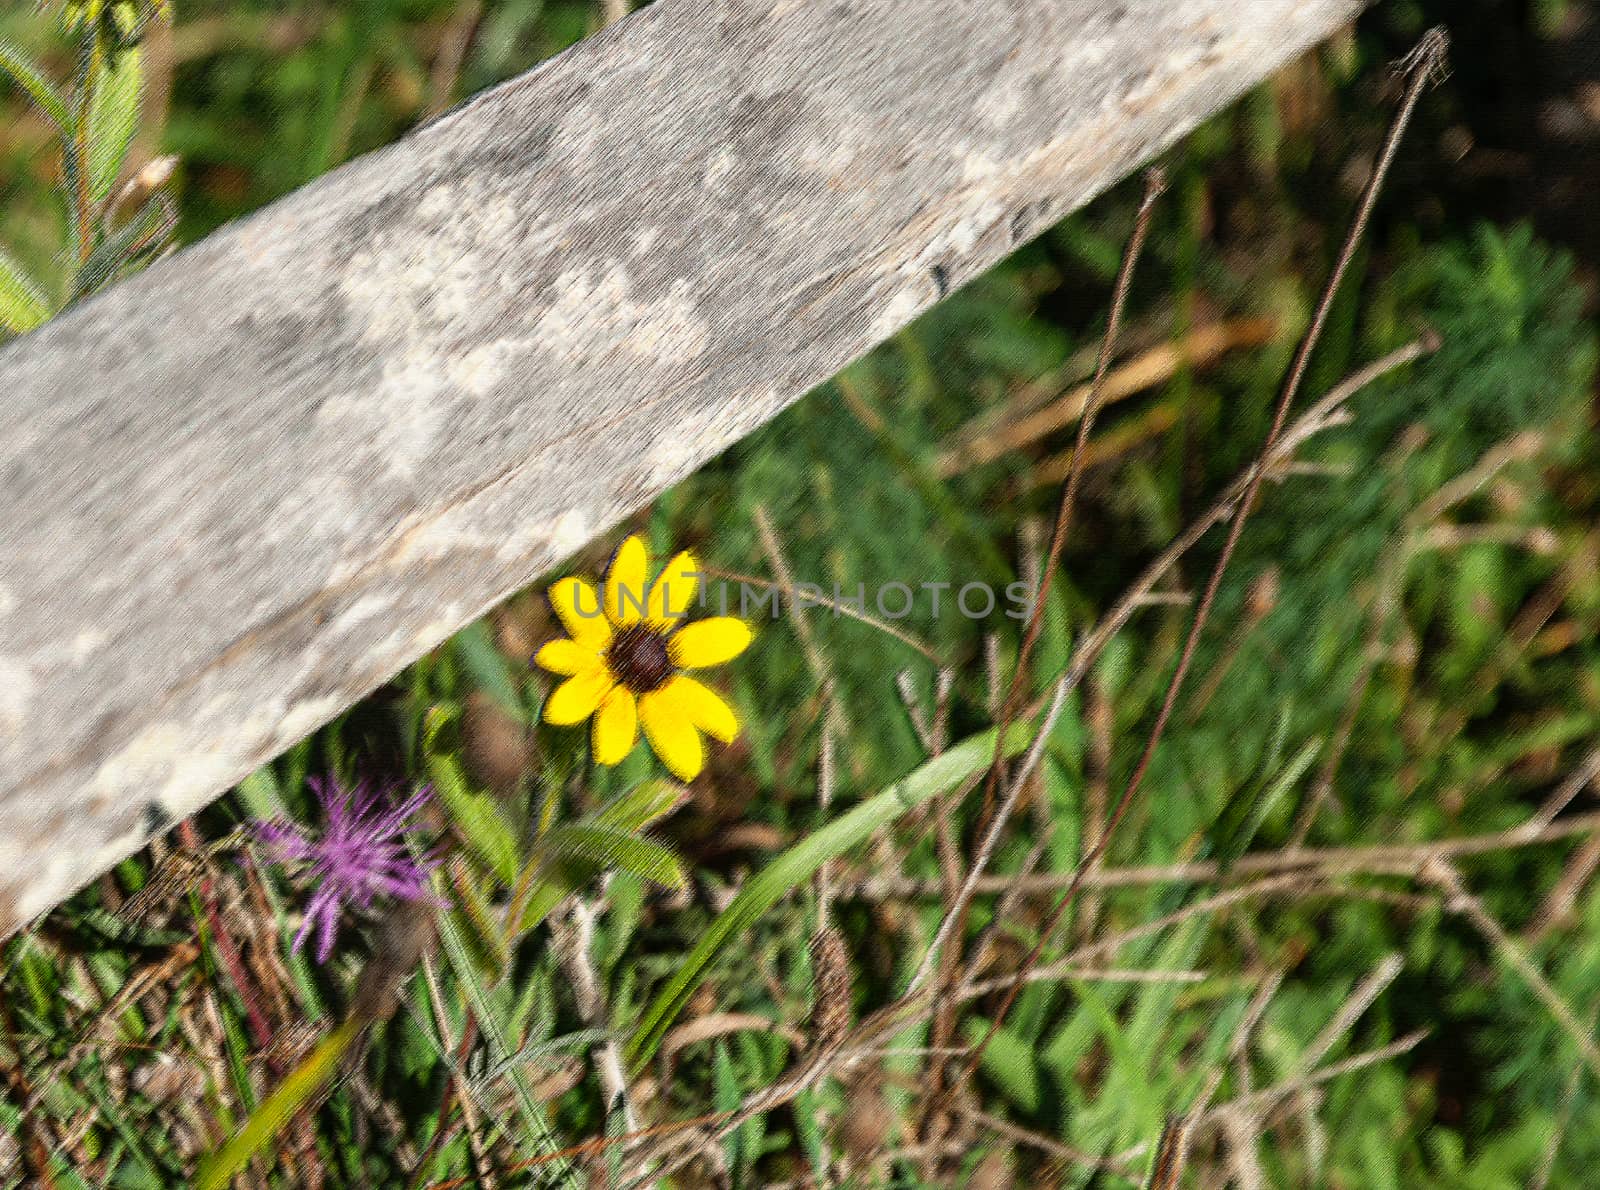 Bright yellow flower in field under rustic wooden fence rail